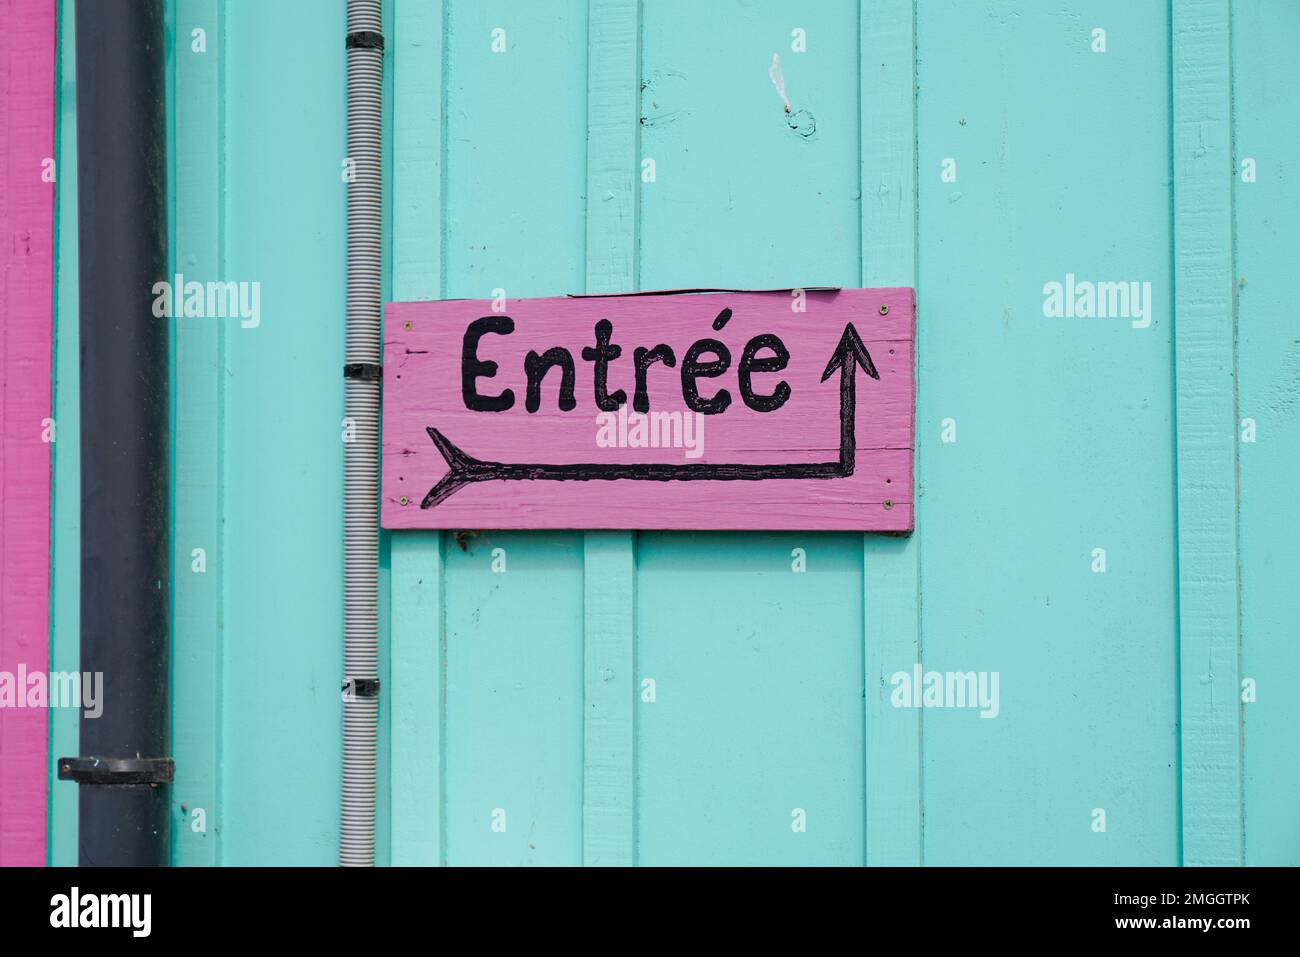 arrow panel entree french text sign means entrance text Stock Photo